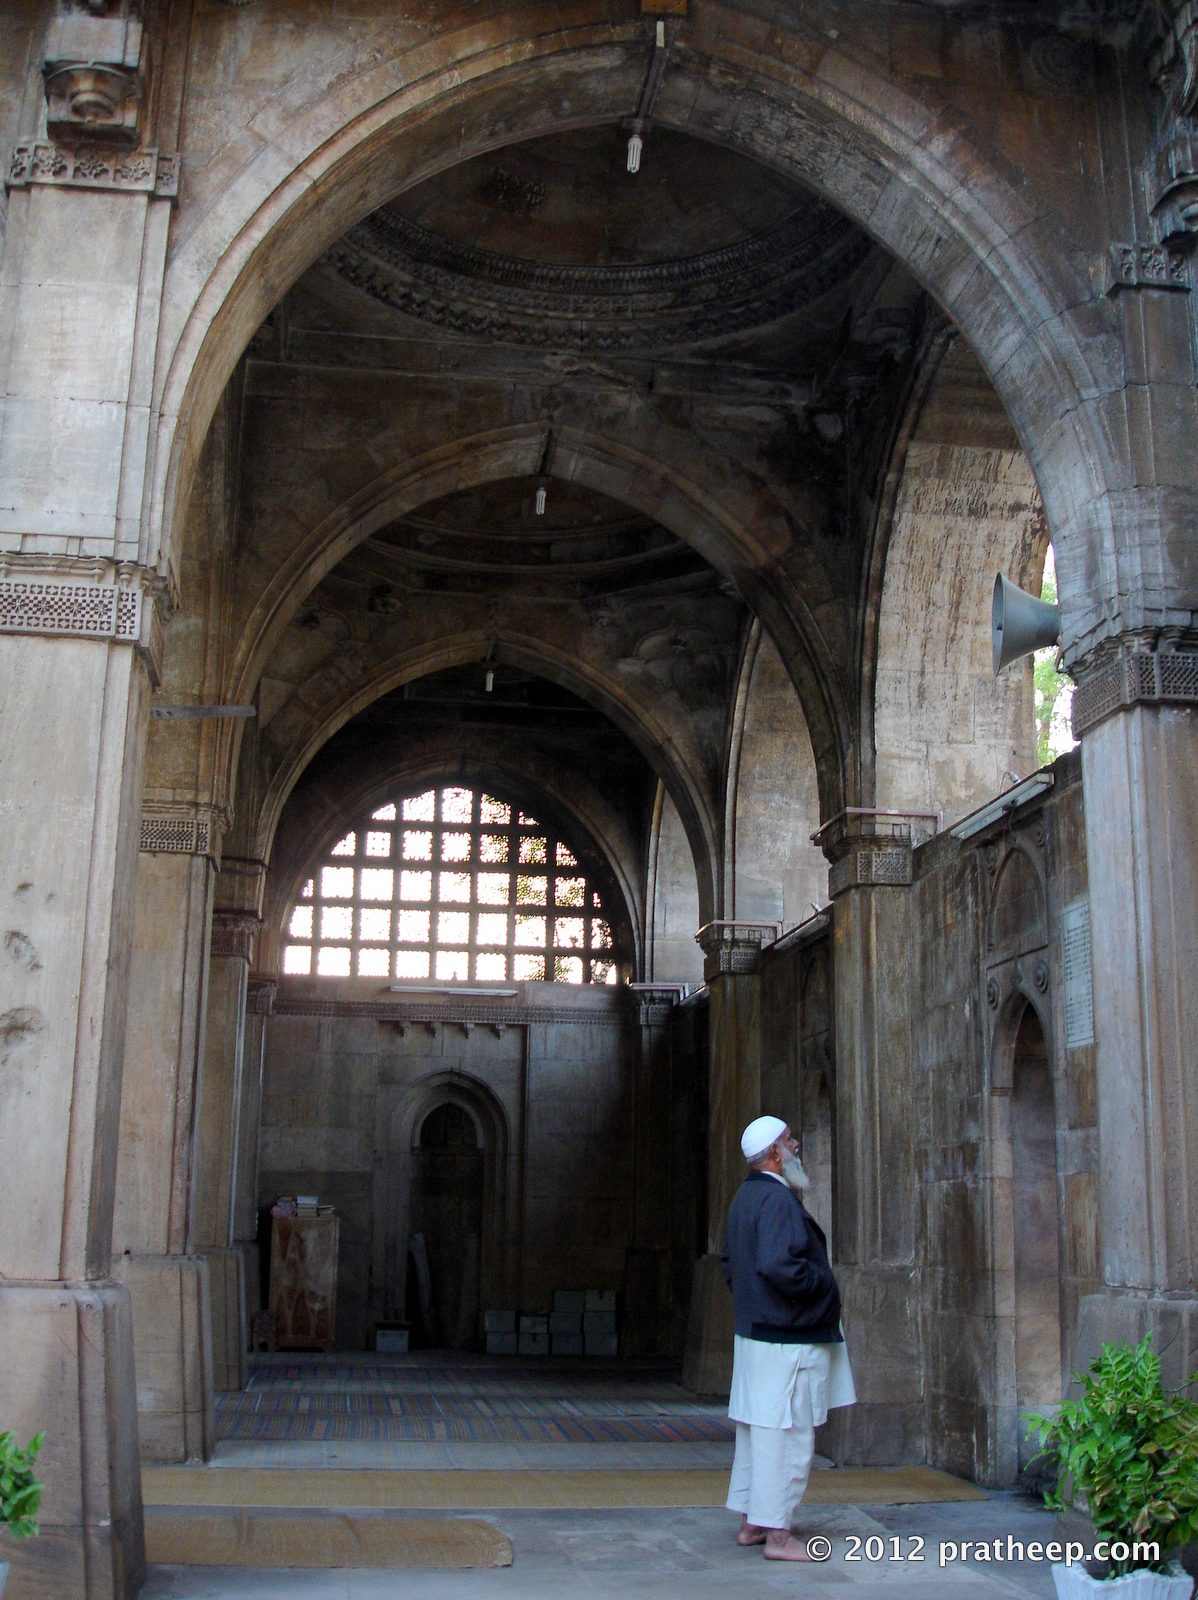 The mosque is entirely arcuated and is famous for beautifully carved ten stone latticework windows (jalis) on the side and rear arches. The rear wall is filled with square stone pierced panels in geometrical designs. The two bays flanking the central aisle have reticulated stone slabs carved in designs of intertwined trees and foliage and a palm motif. 